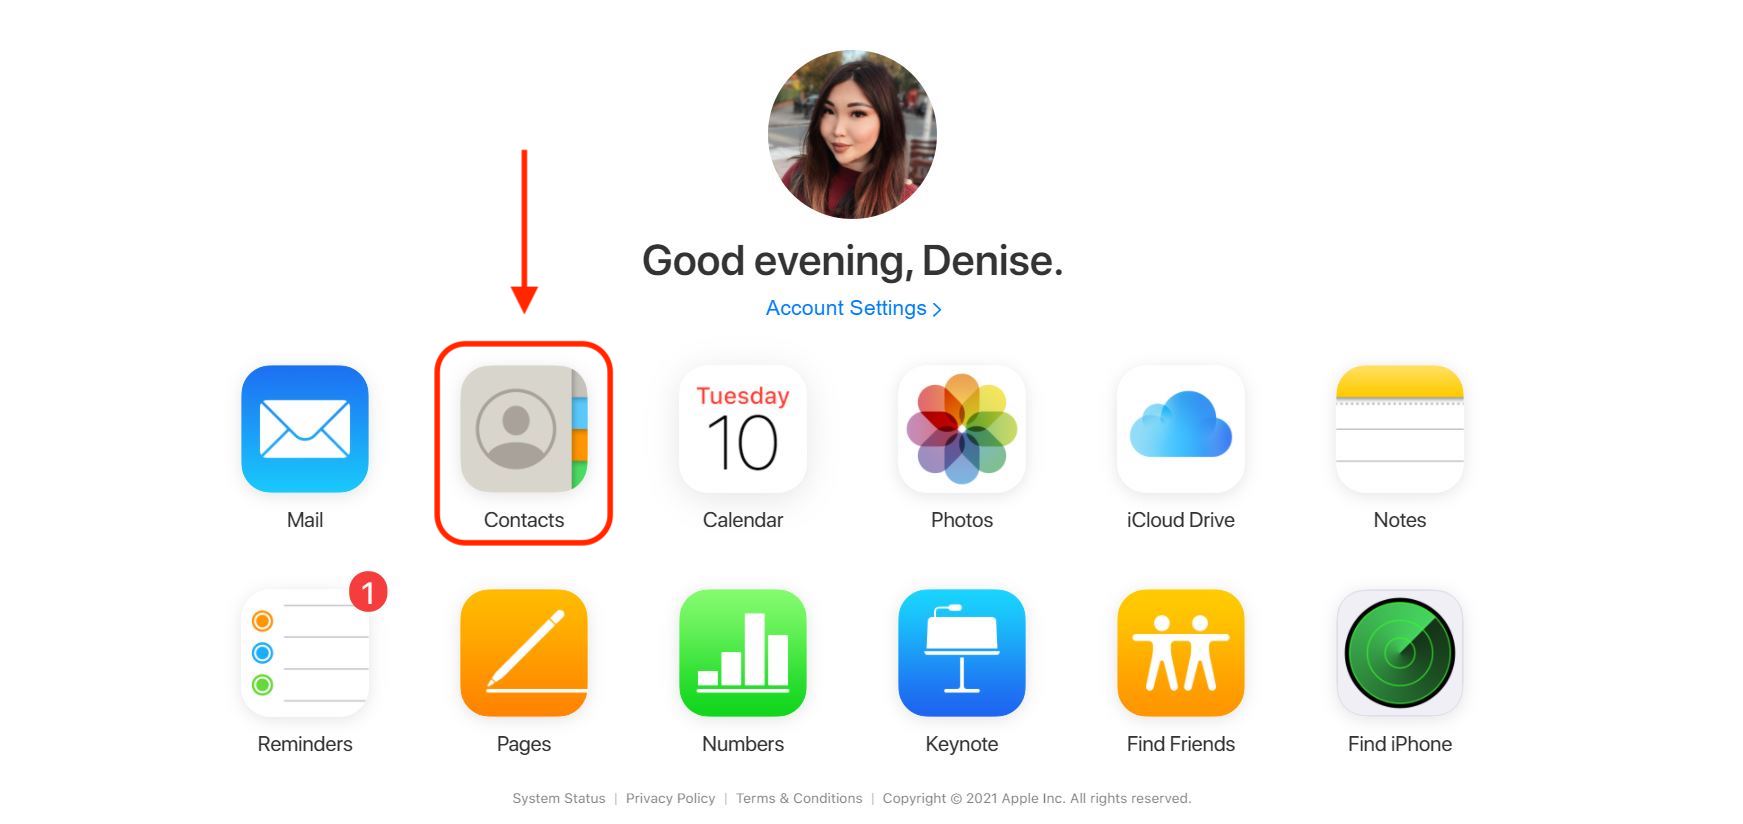 How to delete multiple contacts on iPhone at once